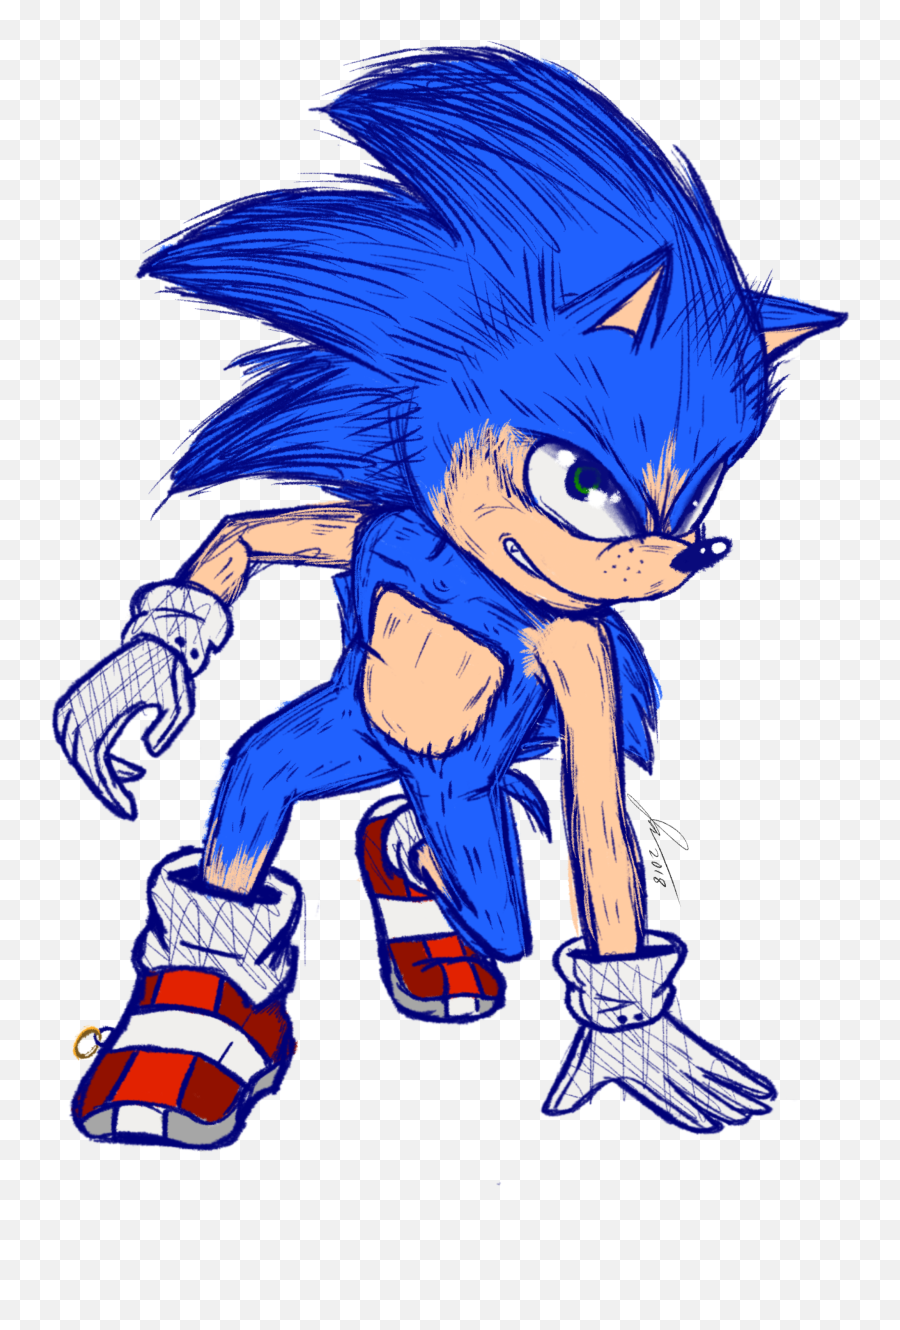 Artwork Tried Drawing The Actual Pose By Tracing The Poster - Sonic The Hedgehog Emoji,Eyes Realistic Drawing Emotion